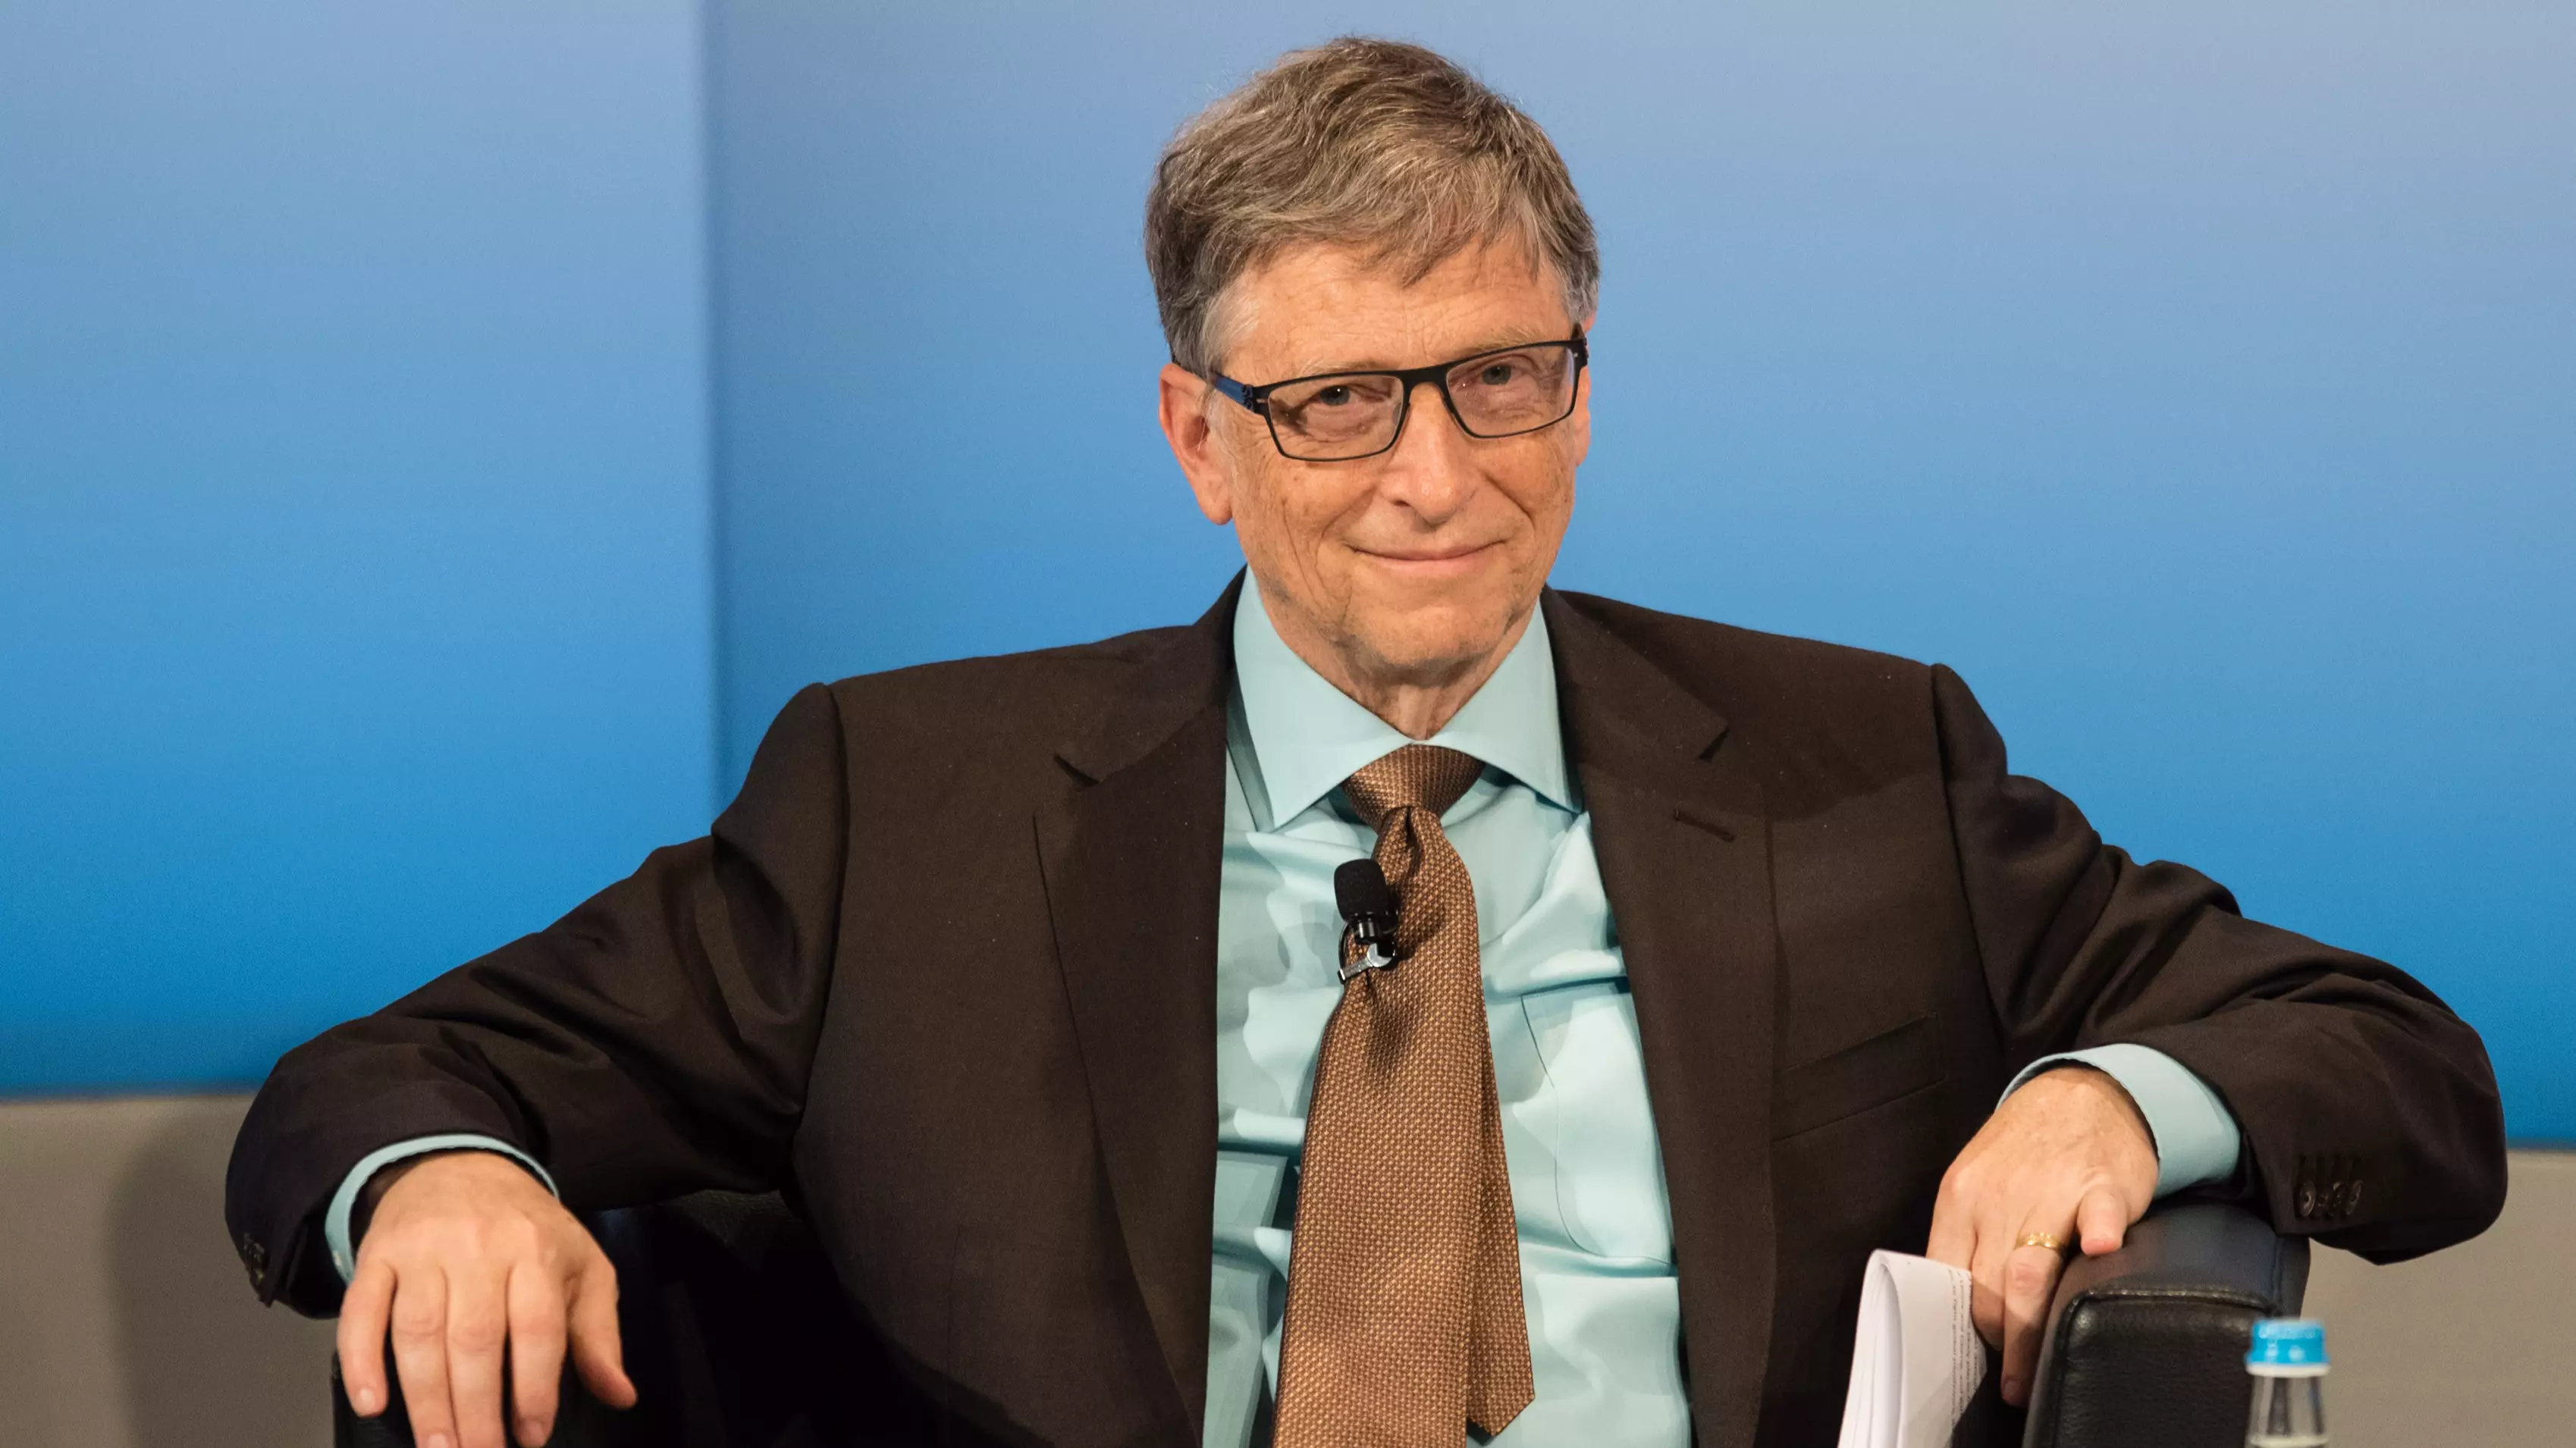 Billionaire Bill Gates Predicted The Future Of Technology Better Than Most 